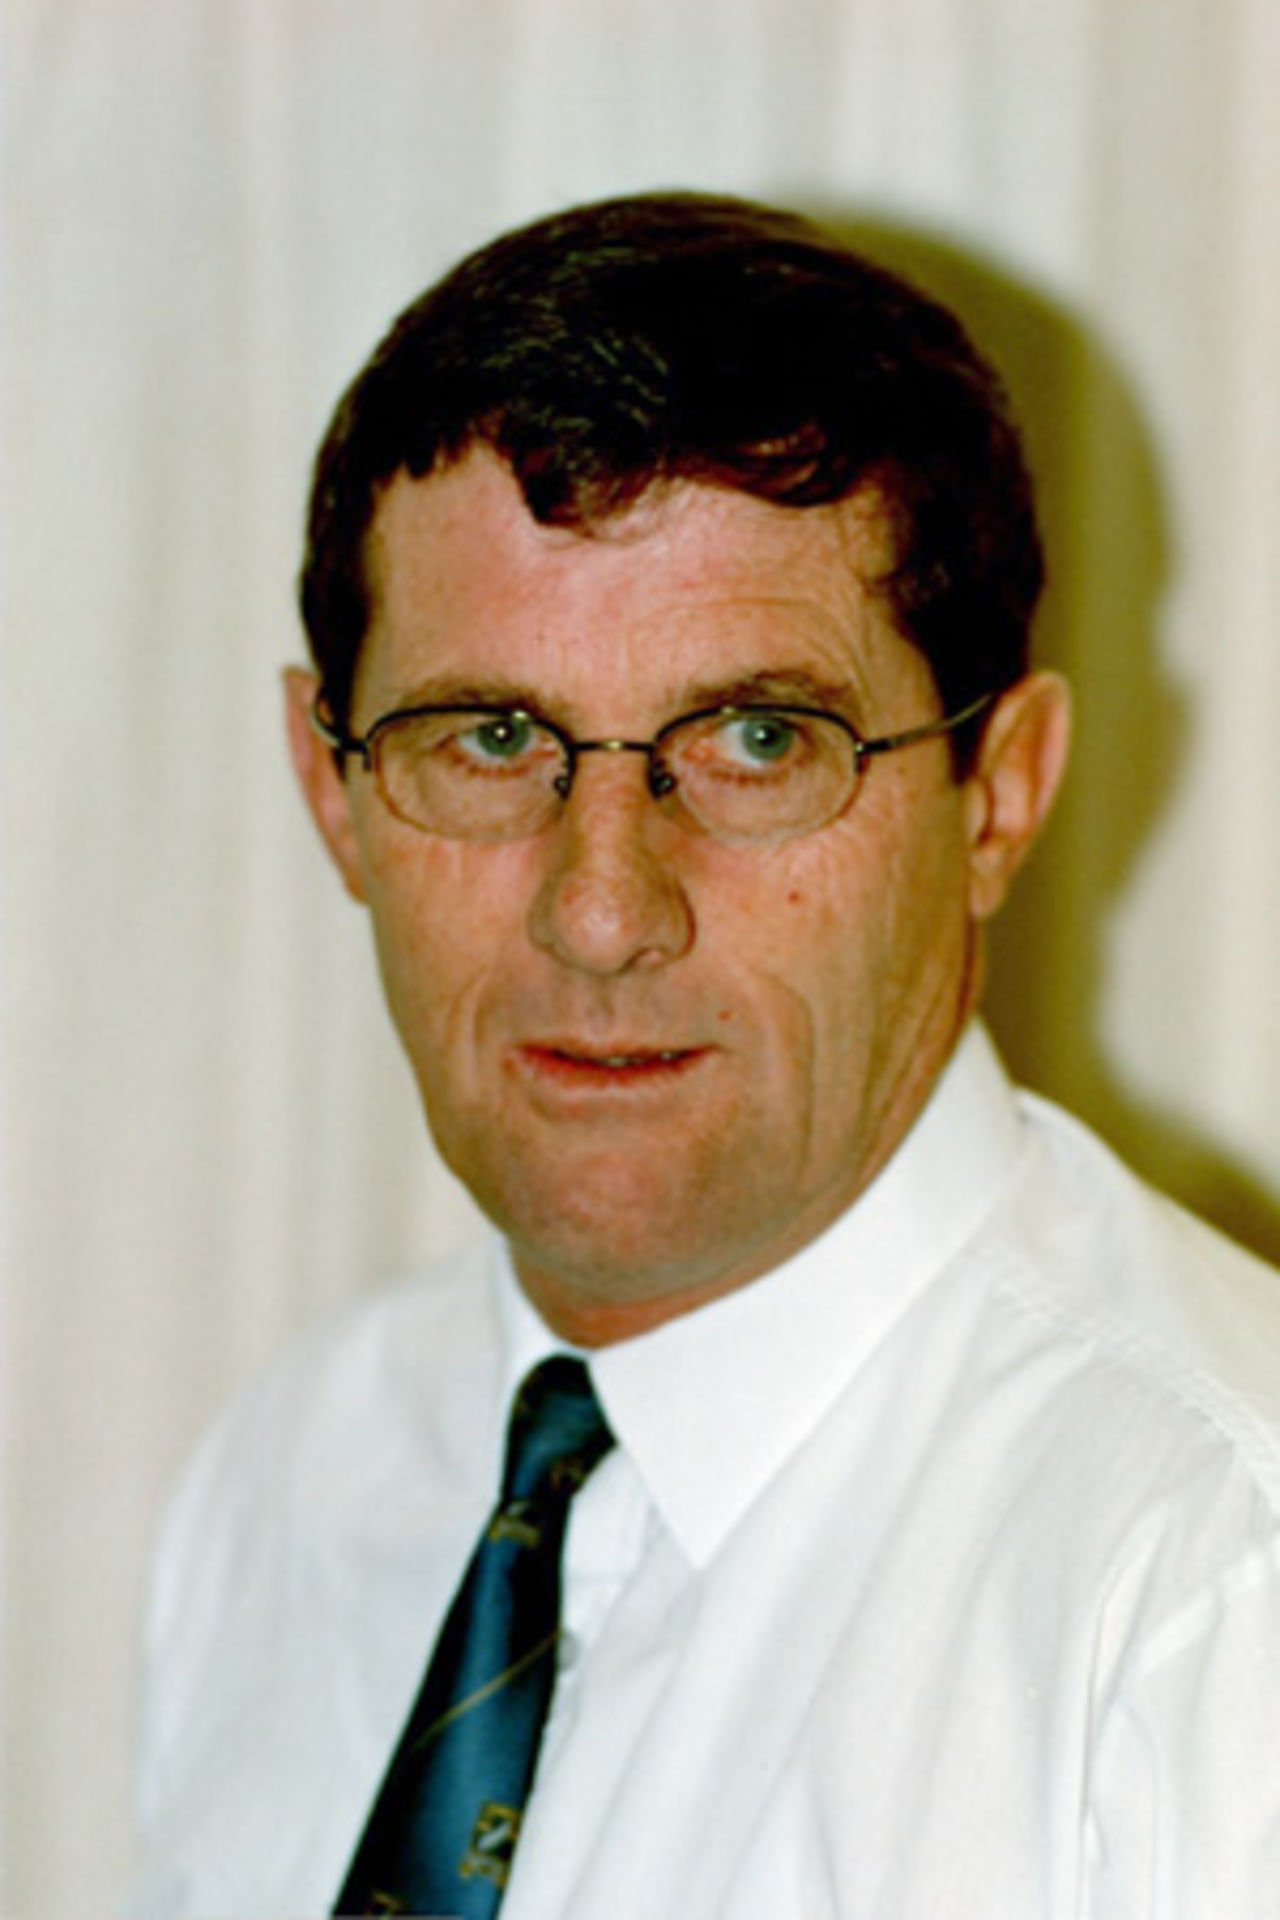 Portrait of Dave Quested, New Zealand 'A' panel umpire in the 2002/03 season.